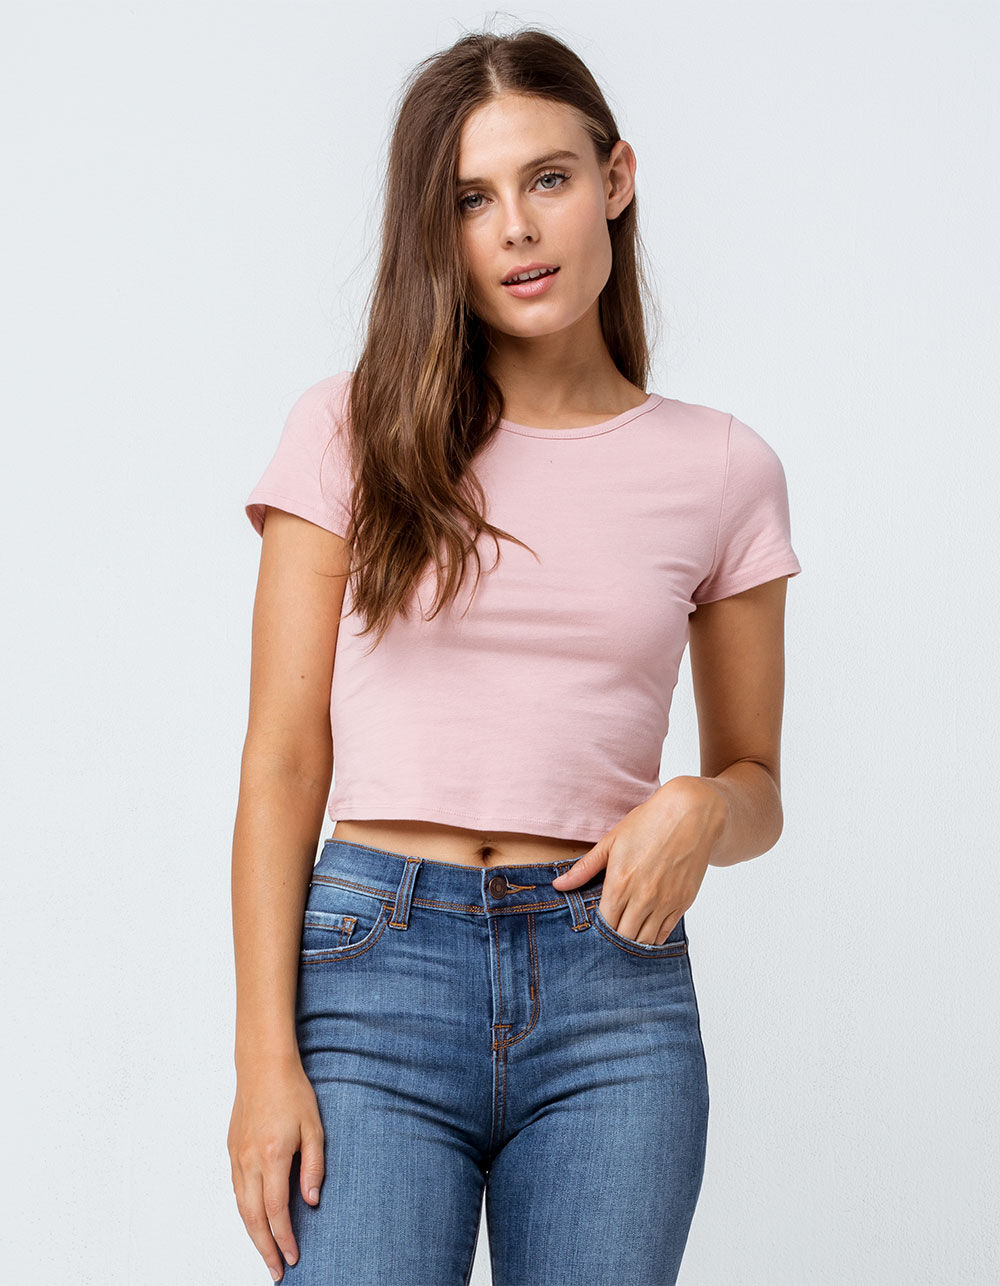 BOZZOLO Twist Back Cut Out Pink Womens Crop Tee image number 0